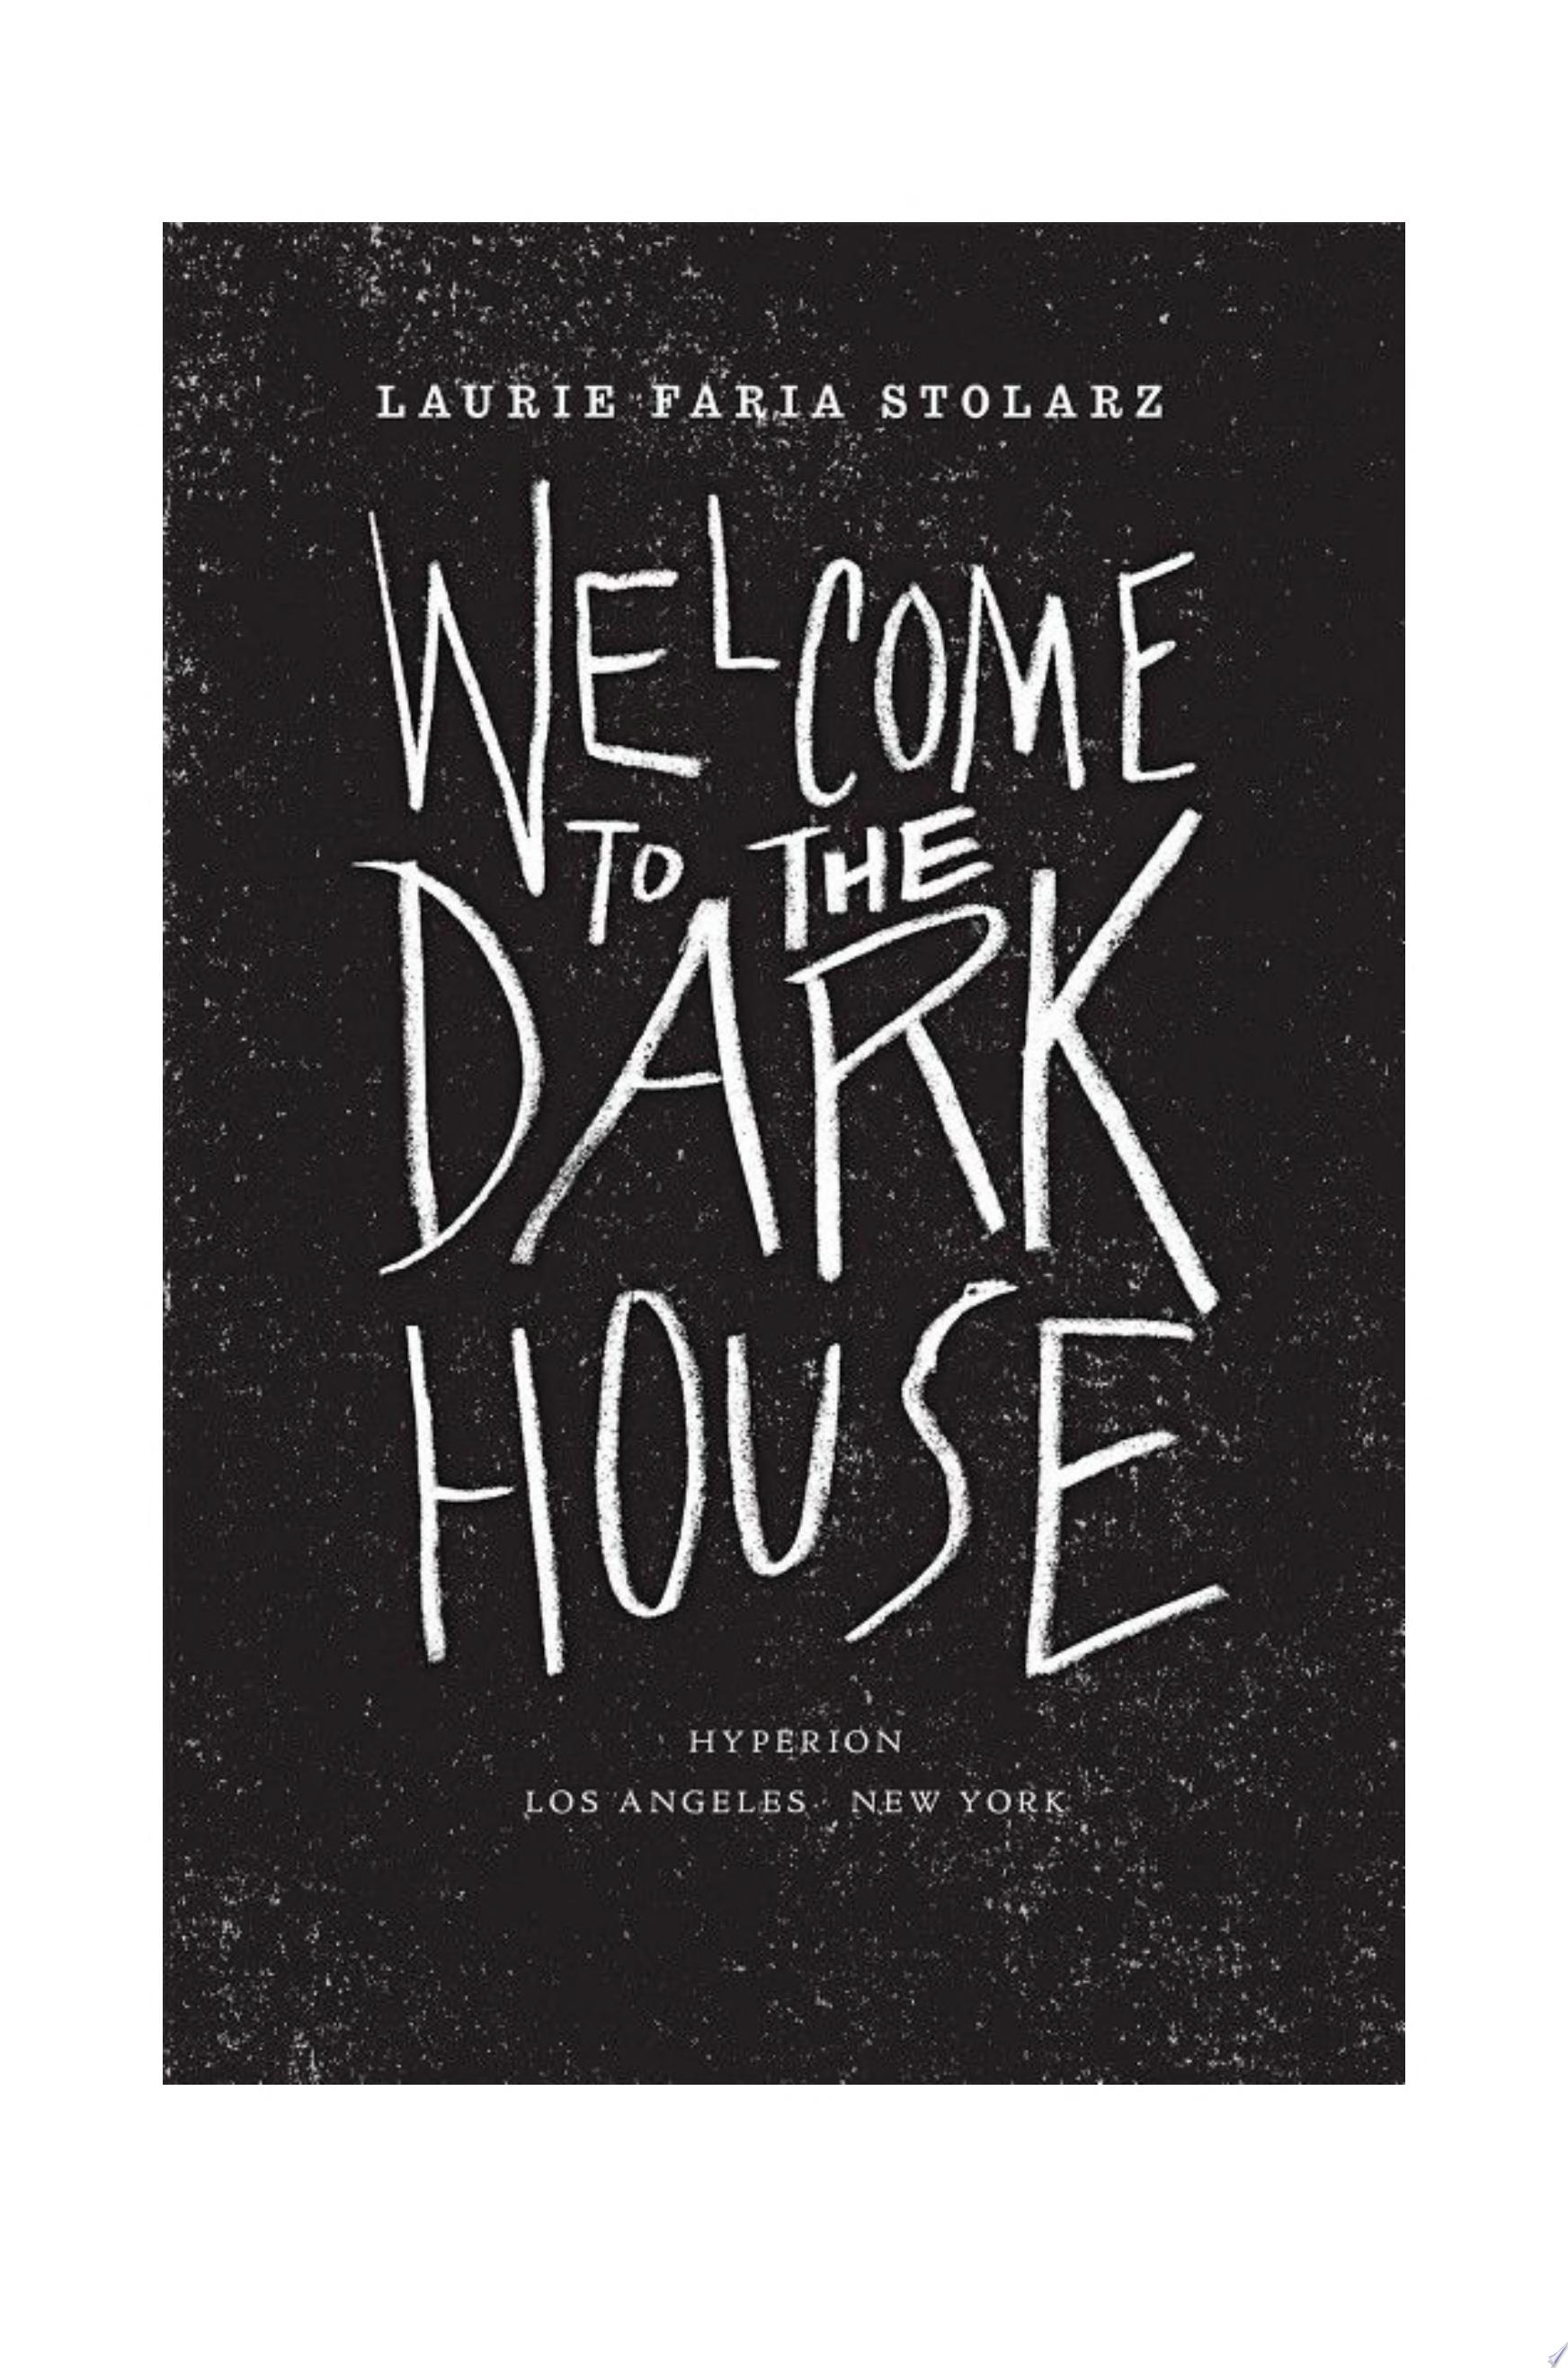 Image for "Welcome to the Dark House"